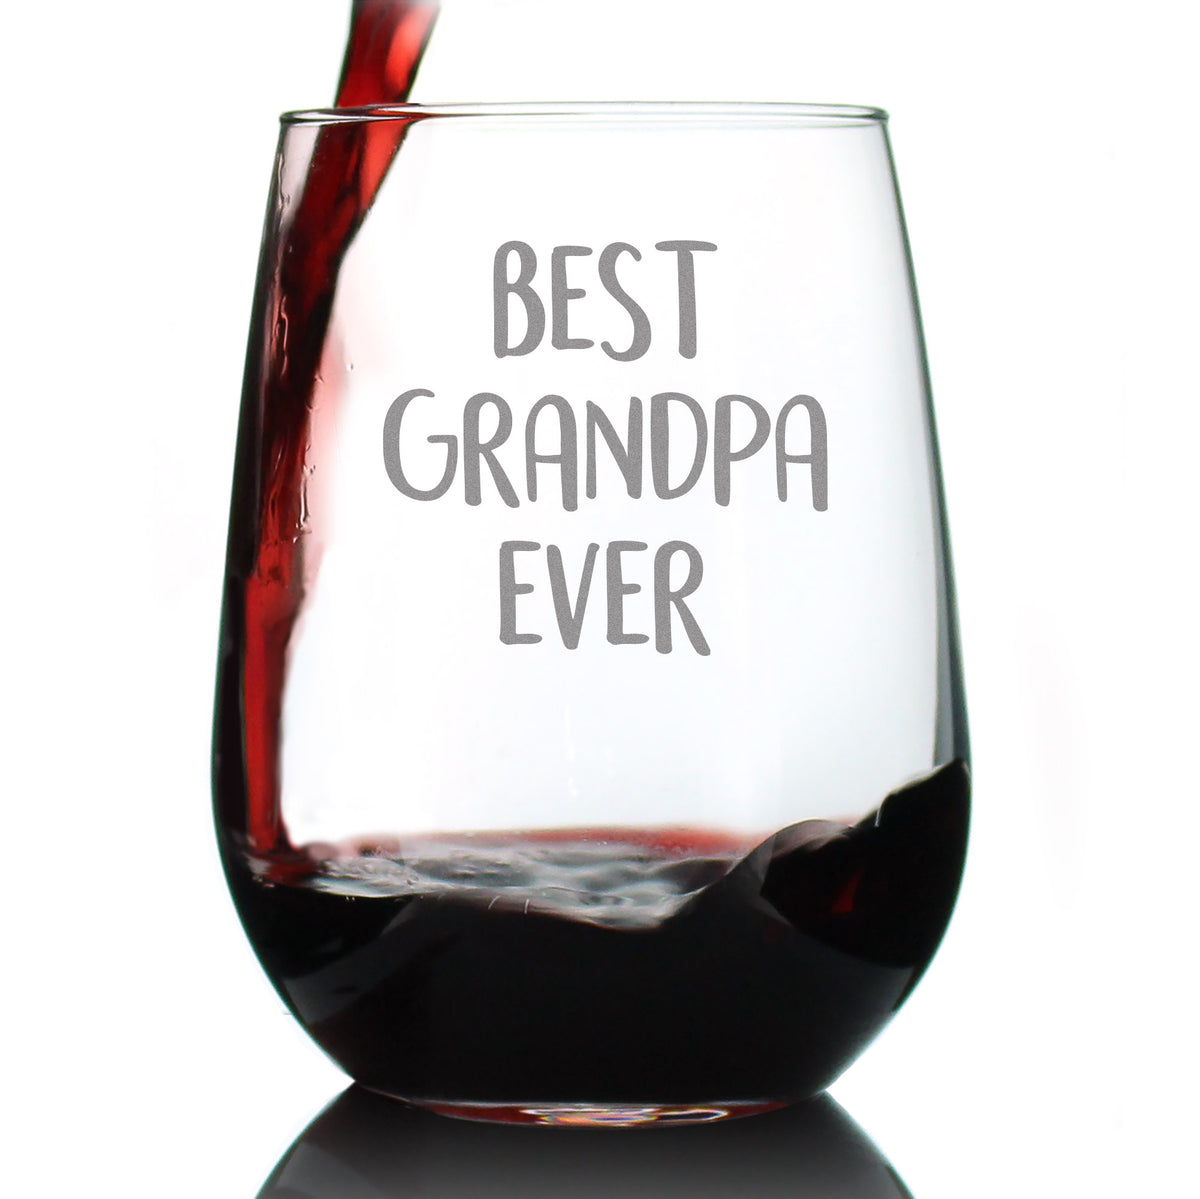 Best Grandpa Ever - Stemless Wine Glass Gift for Grandfathers &amp; Dads - Fun Birthday Glassware - Large Glasses